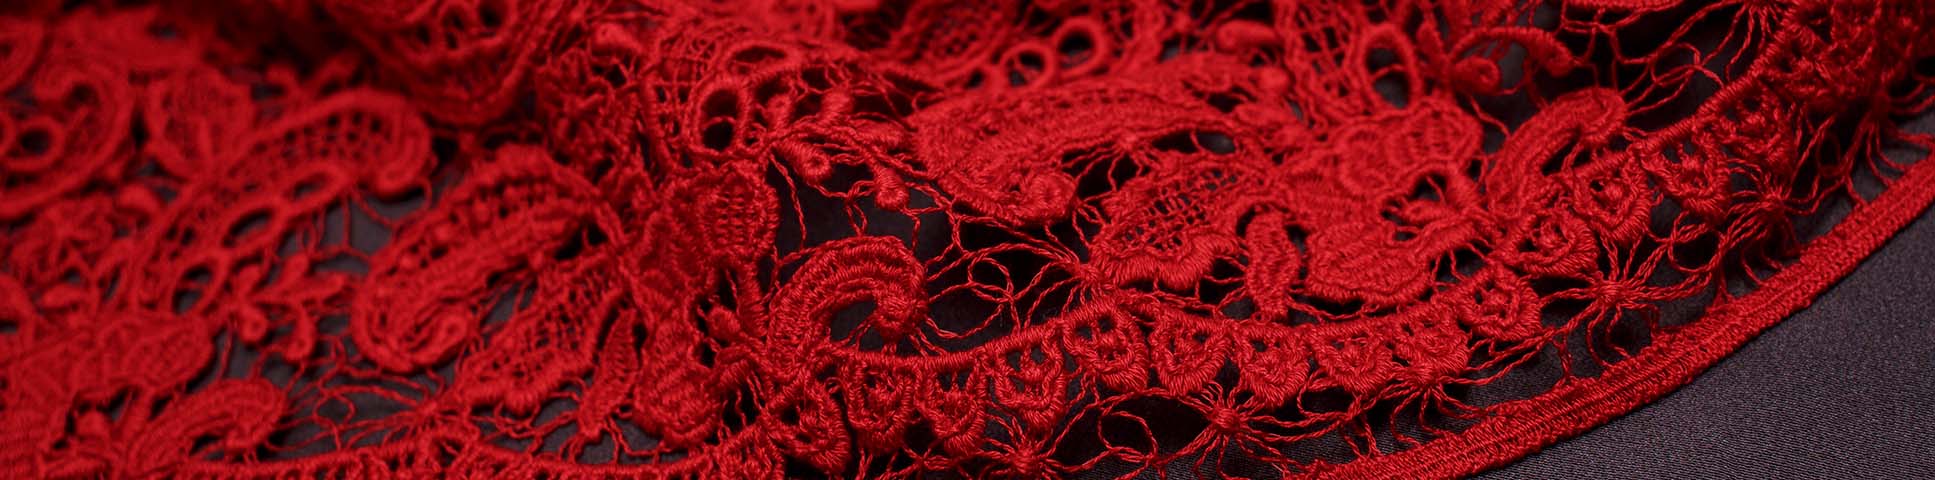 red lace